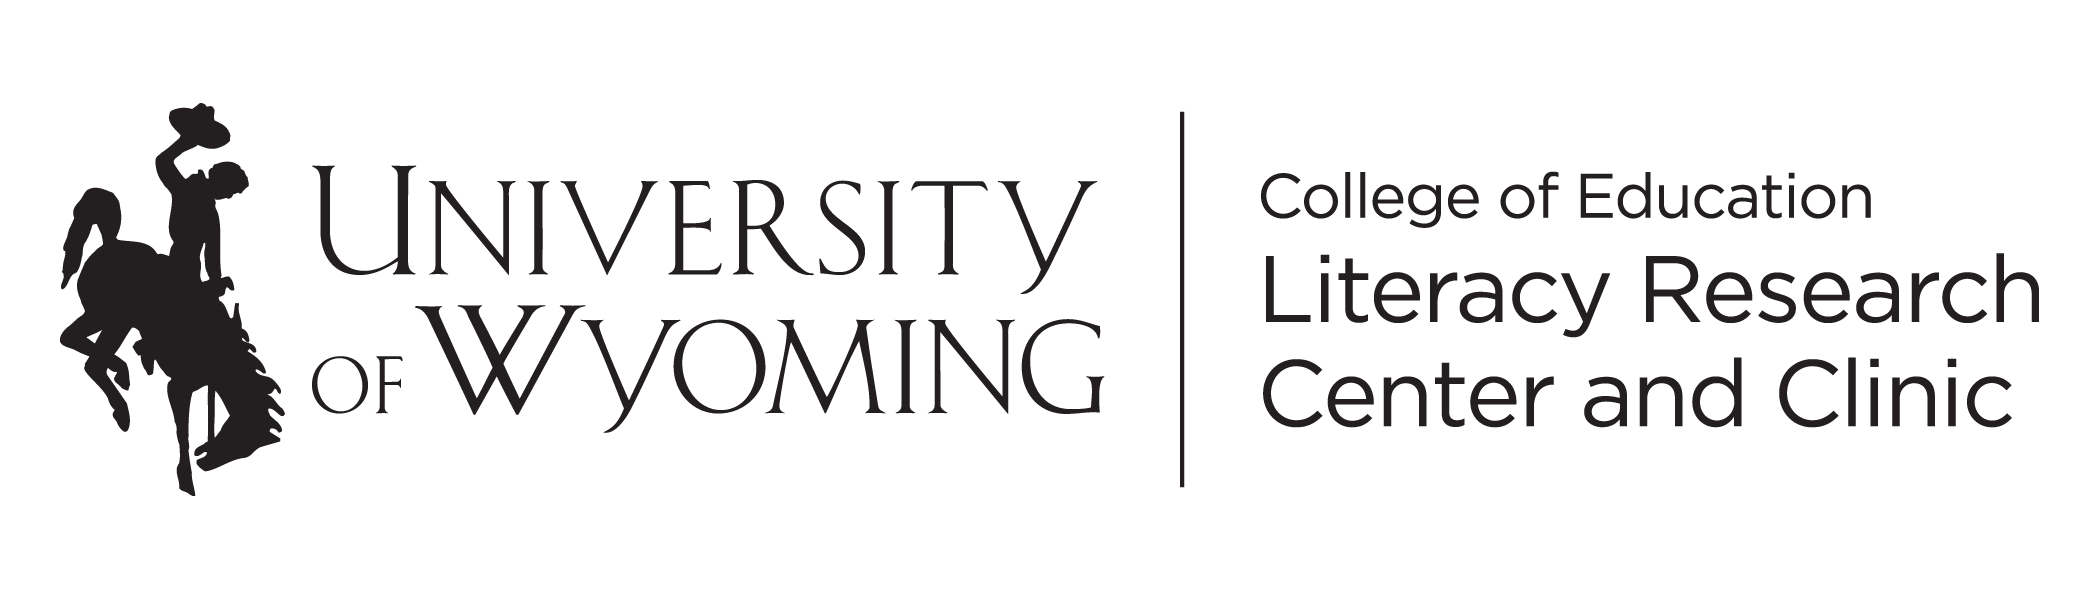 Logo for UW Literacy Research Center and Clinic